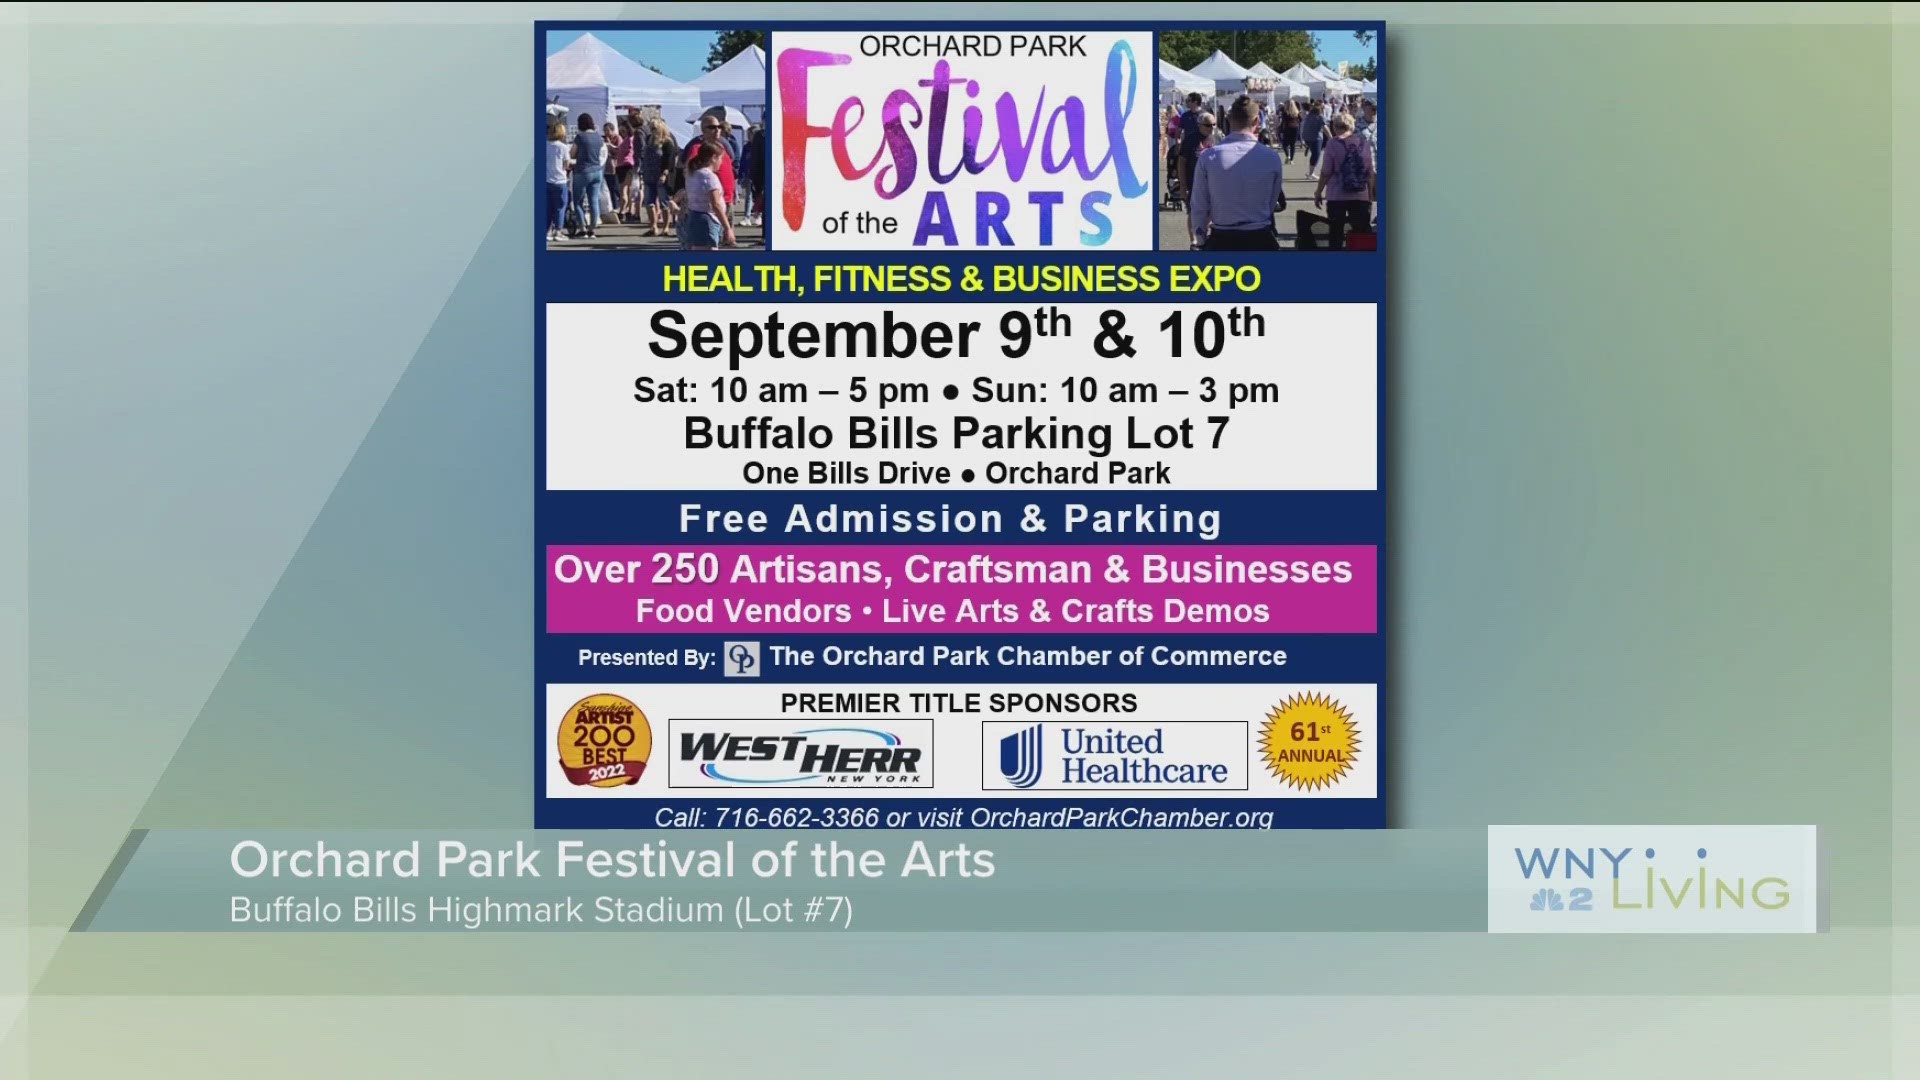 Sept. 2nd - Orchard Park Festival of Arts  (THIS VIDEO IS SPONSORED BY ORCHARD PARK FESTIVAL OF ARTS)